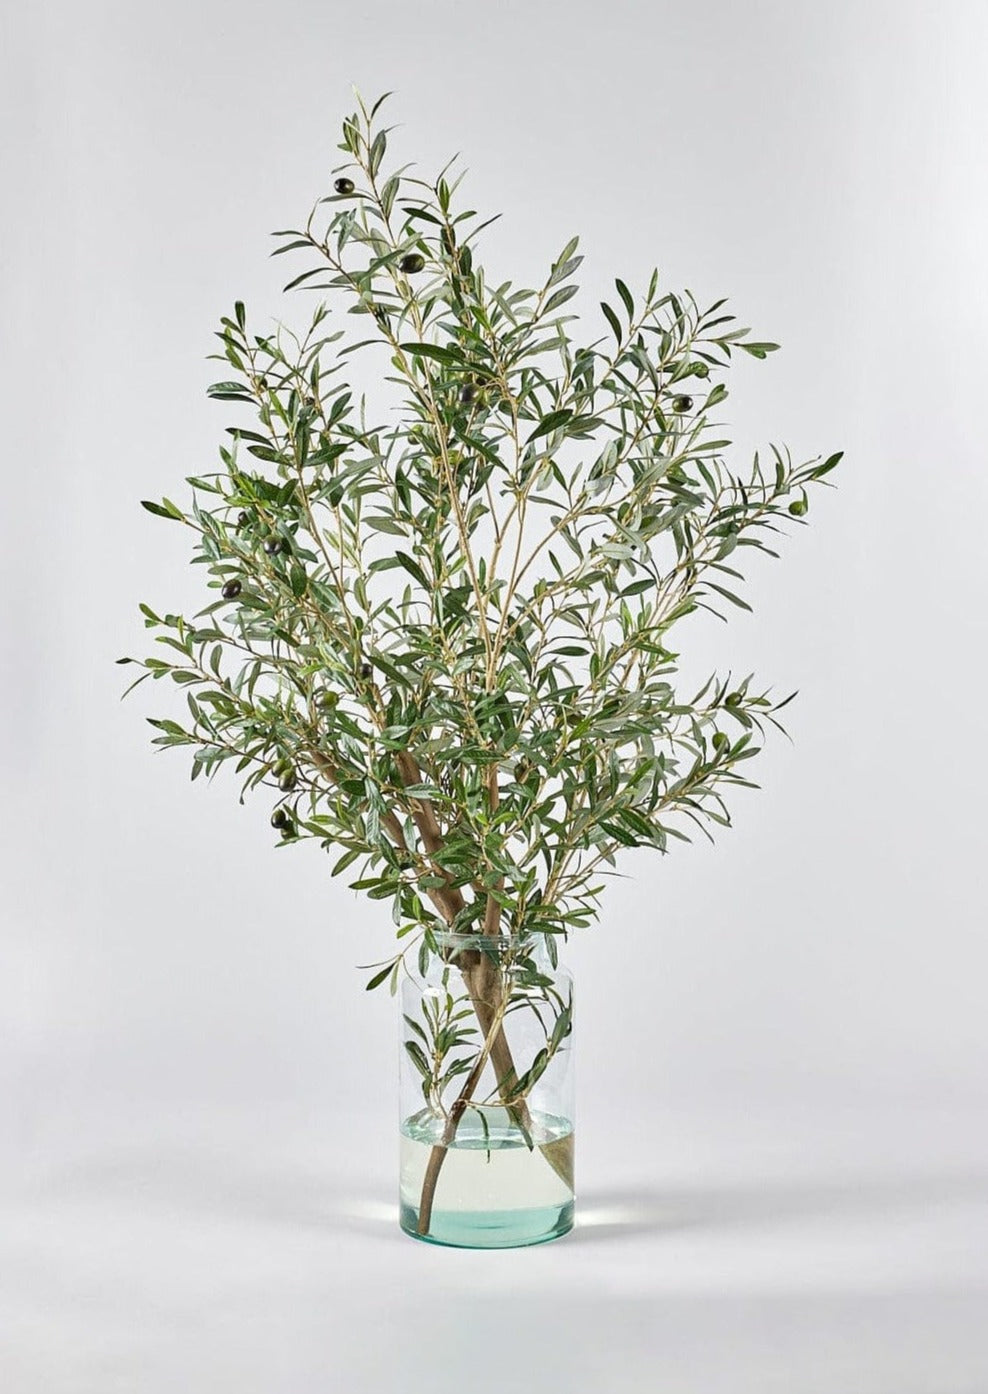 6 Pcs Artificial Olive Branches,Faux Fake Olive Branch Stems for Vase  Decoration,Faux Greenery Branches Stems for Home Office Floral Arrangement  Decor